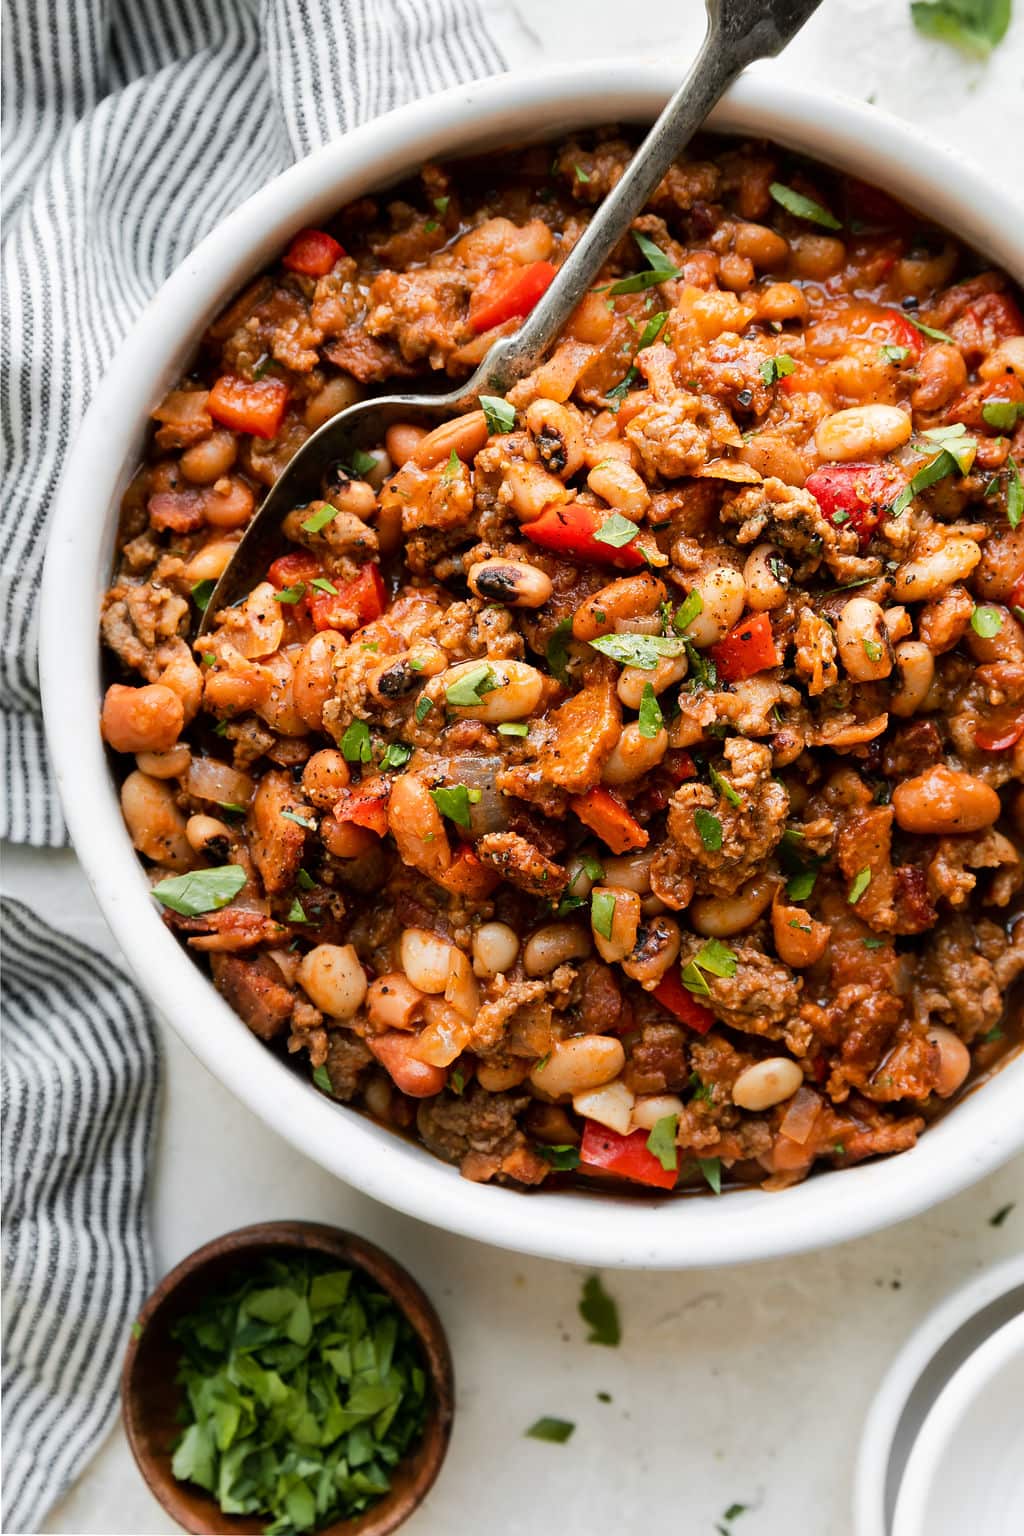 https://therealfooddietitians.com/wp-content/uploads/2022/04/Slow-Cooker-Cowboy-Beans-7.jpg